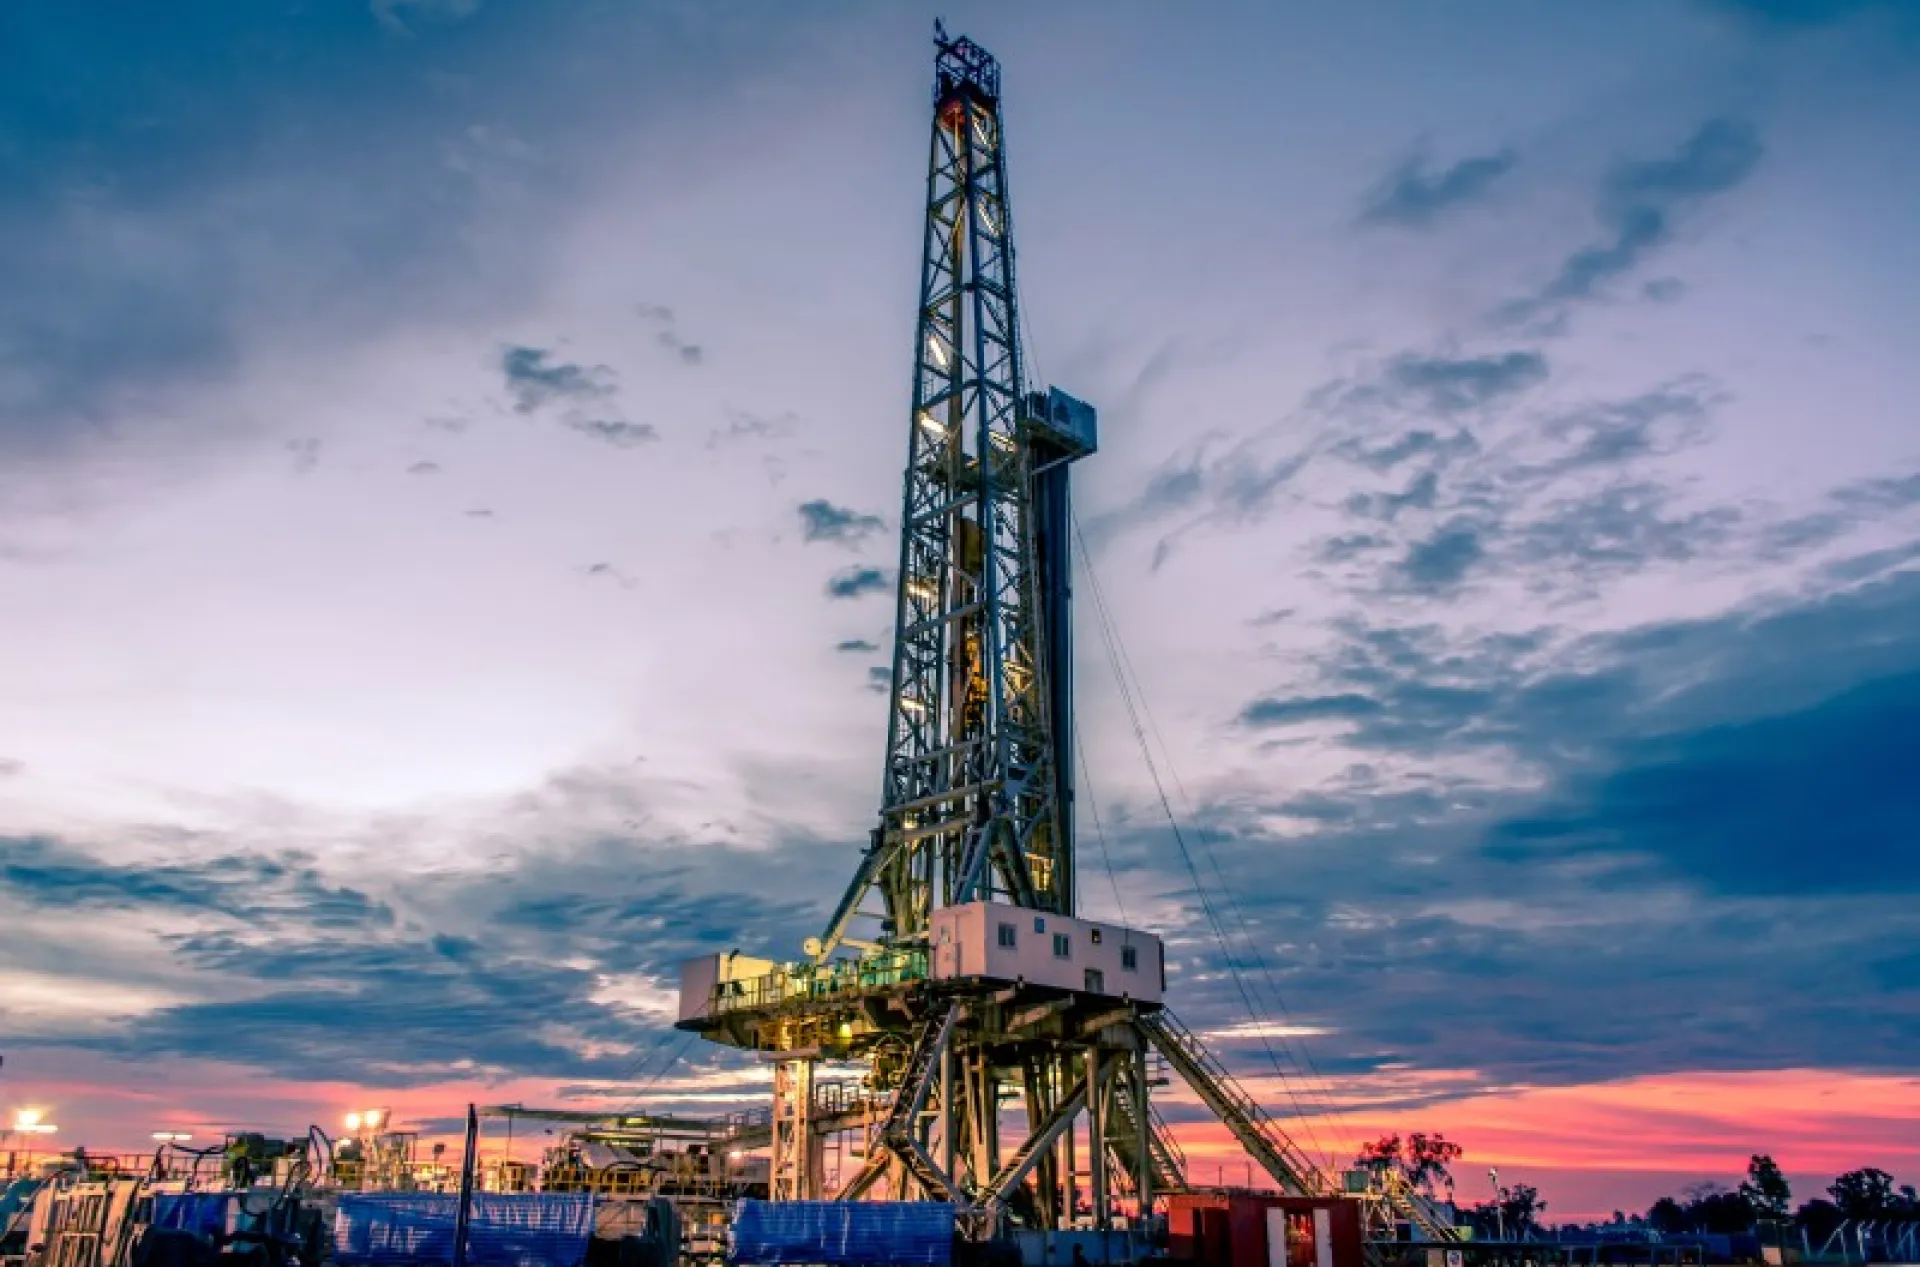 U.S. Energy Development Corporation to Invest $750 Million in Permian Basin Projects